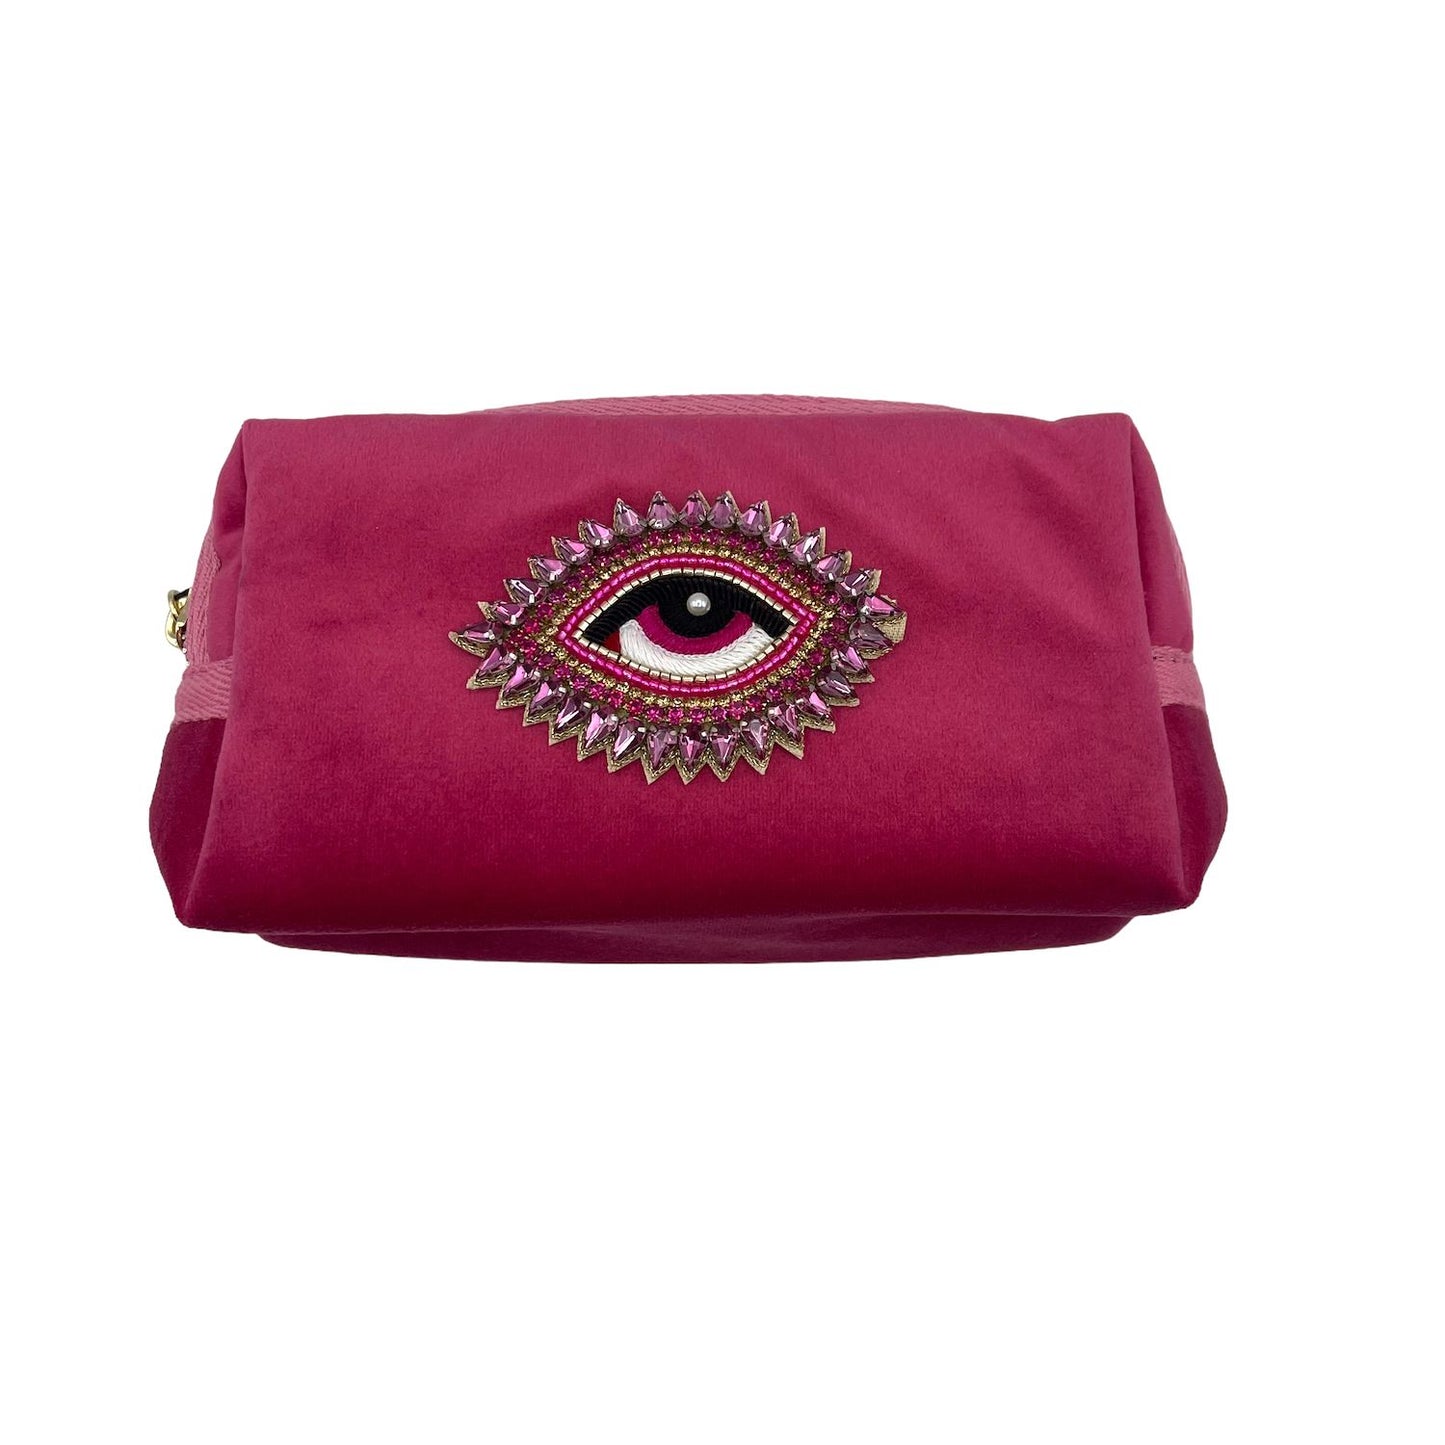 Bright pink make-up bag and a rose eye pink - recycled velvet